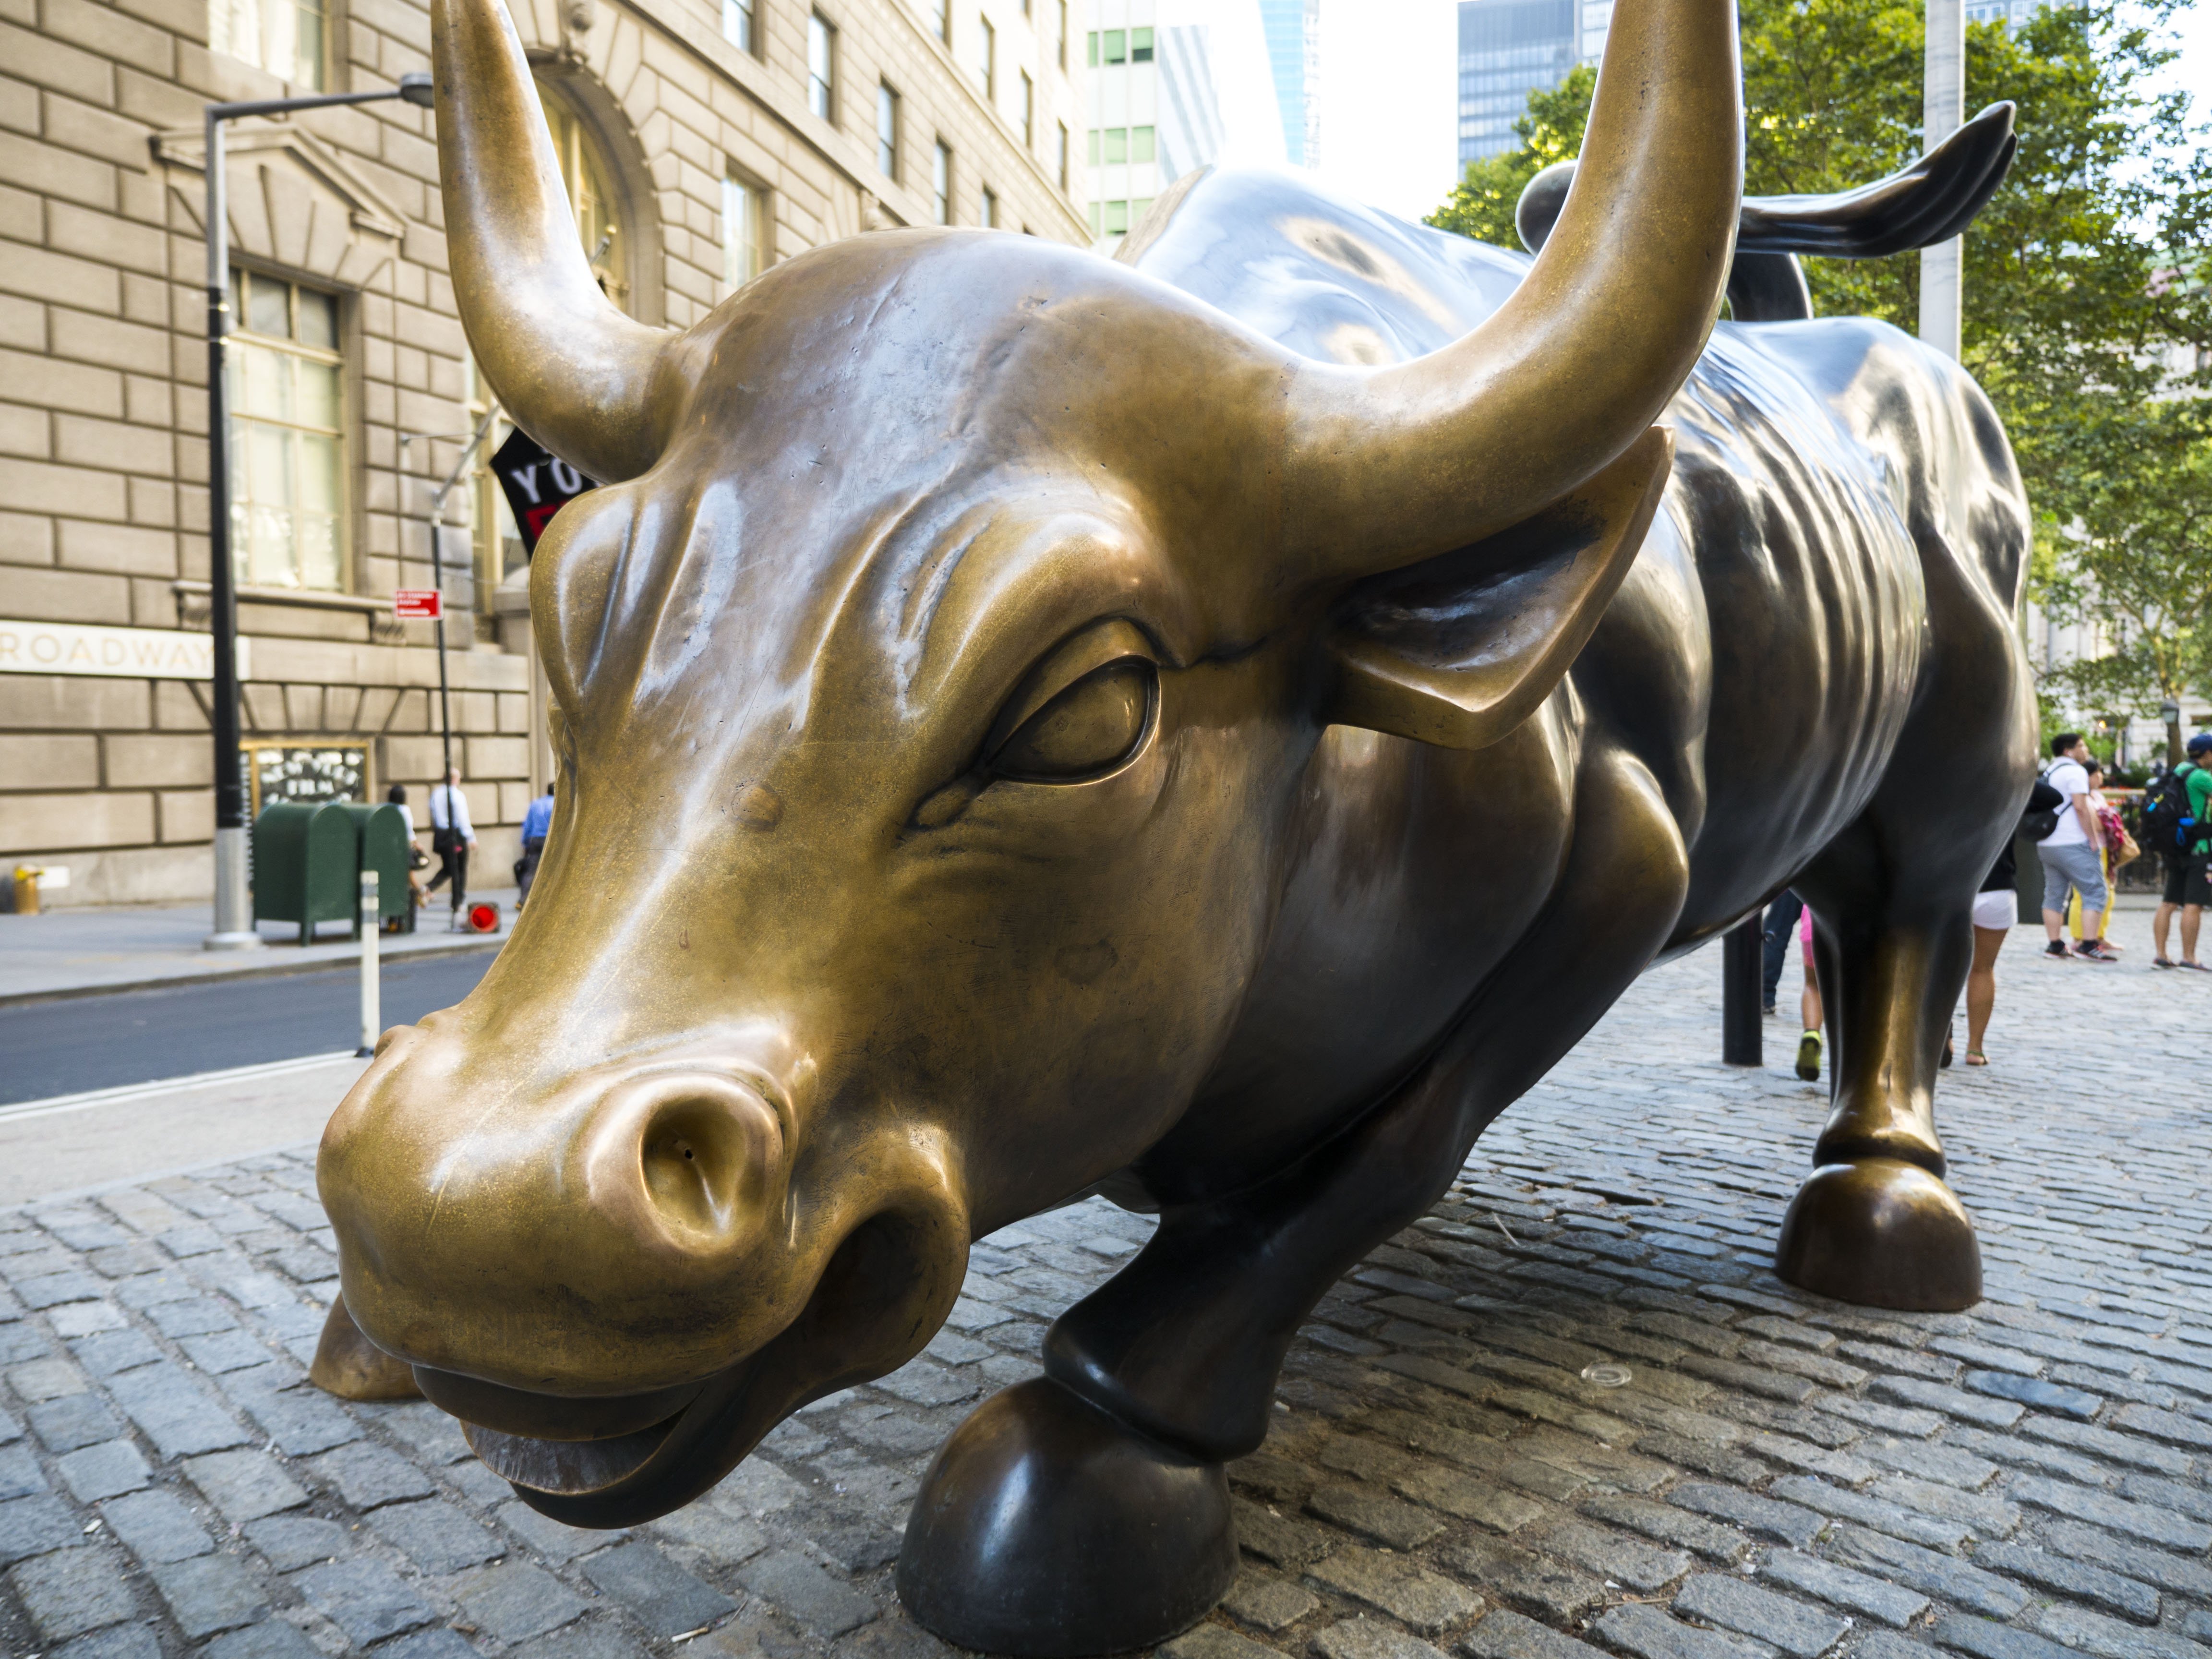 Visit the Charging Bull on Wall Street on your way to Battery Park